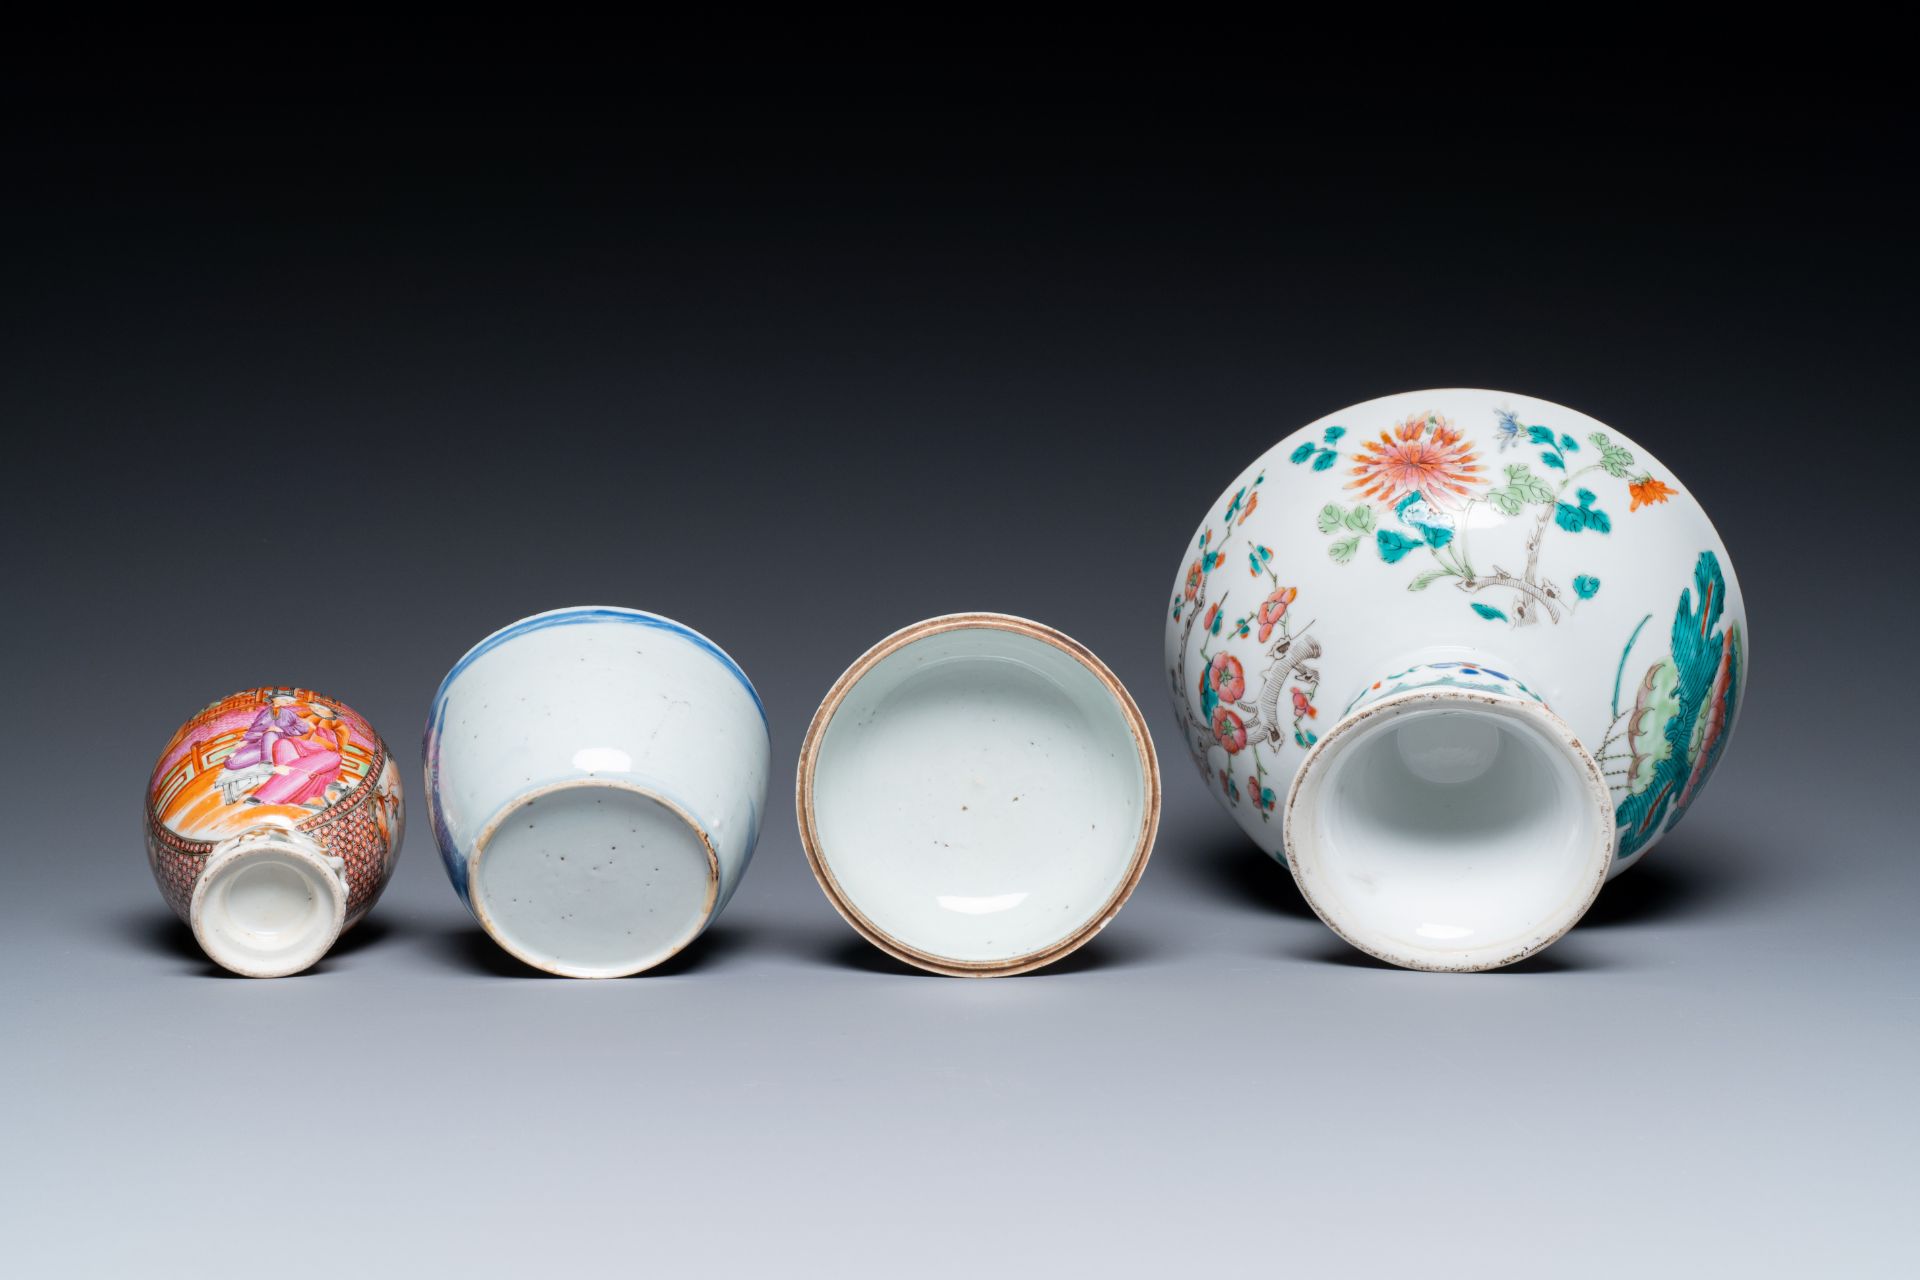 A varied collection of Chinese porcelain, 18/19th C. - Image 7 of 11